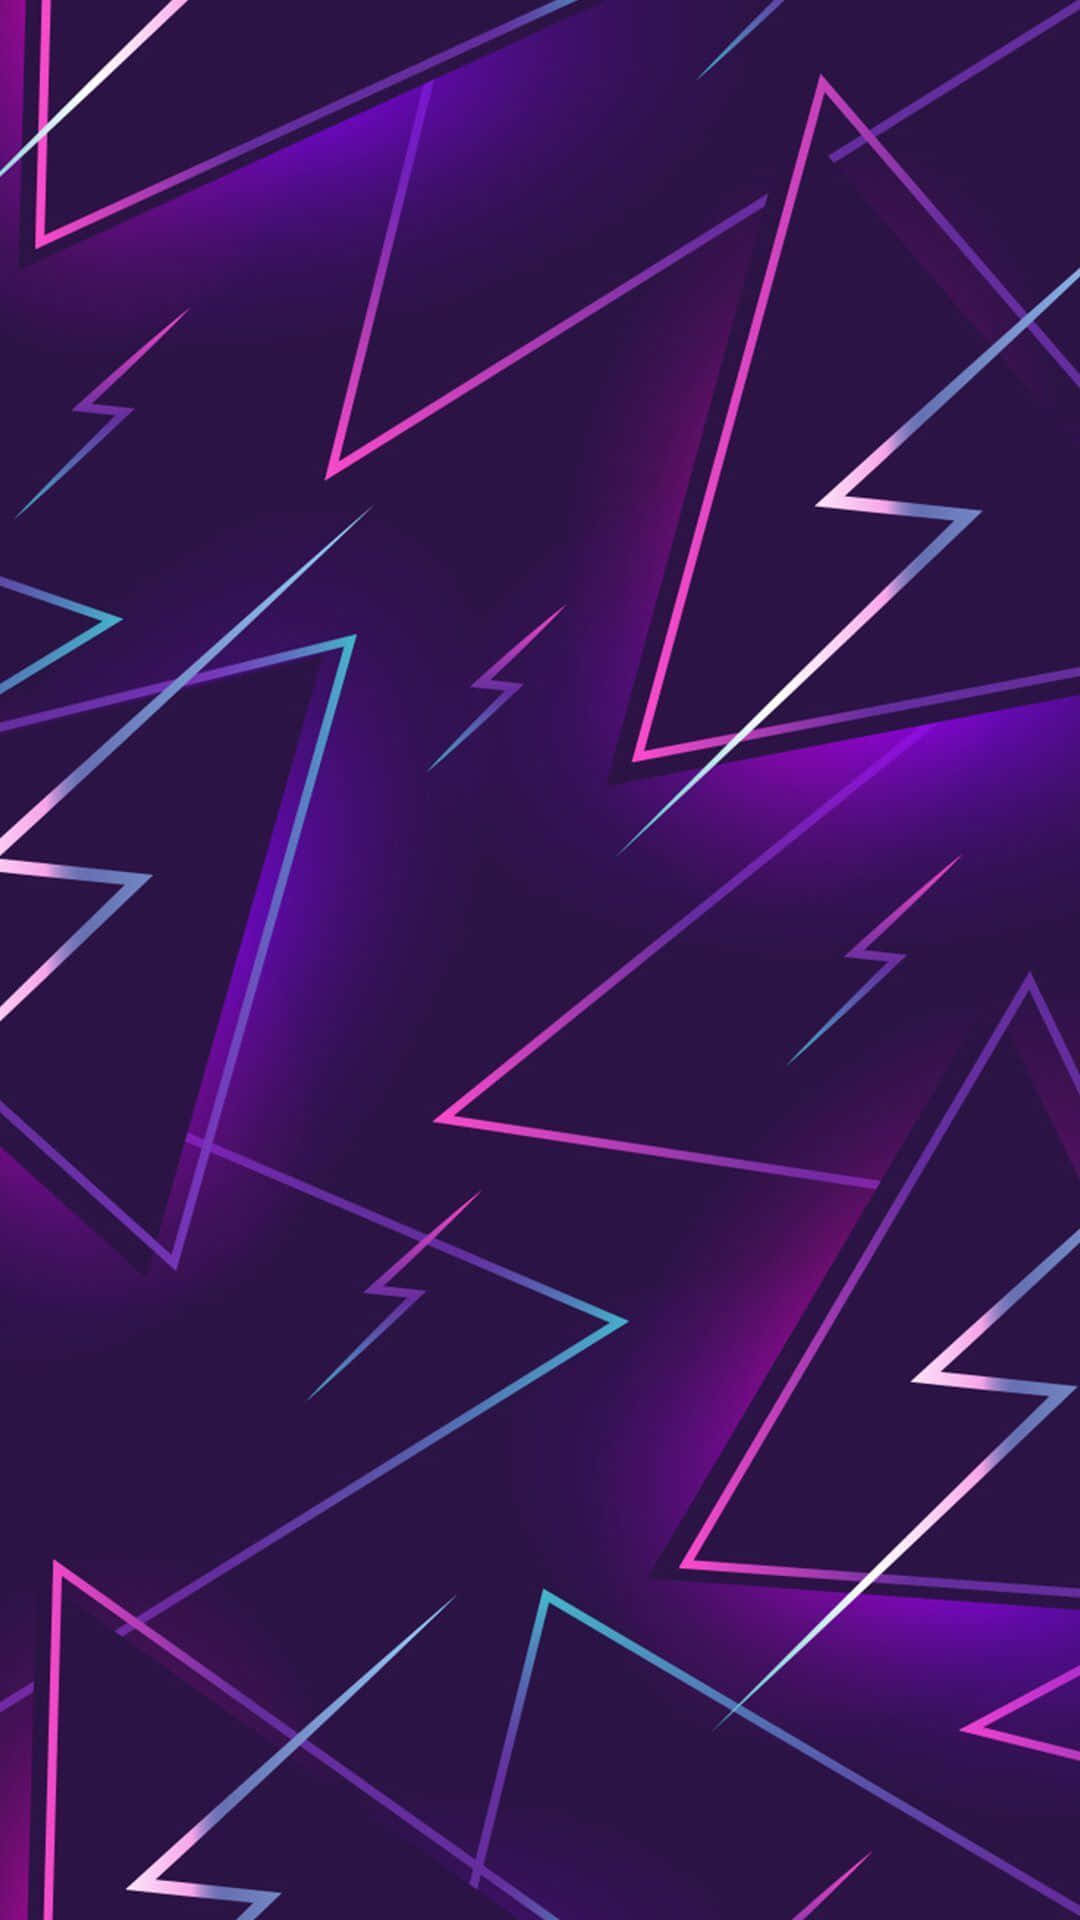 Make way for technology! This iPhone Neon background stands out against the darkness.